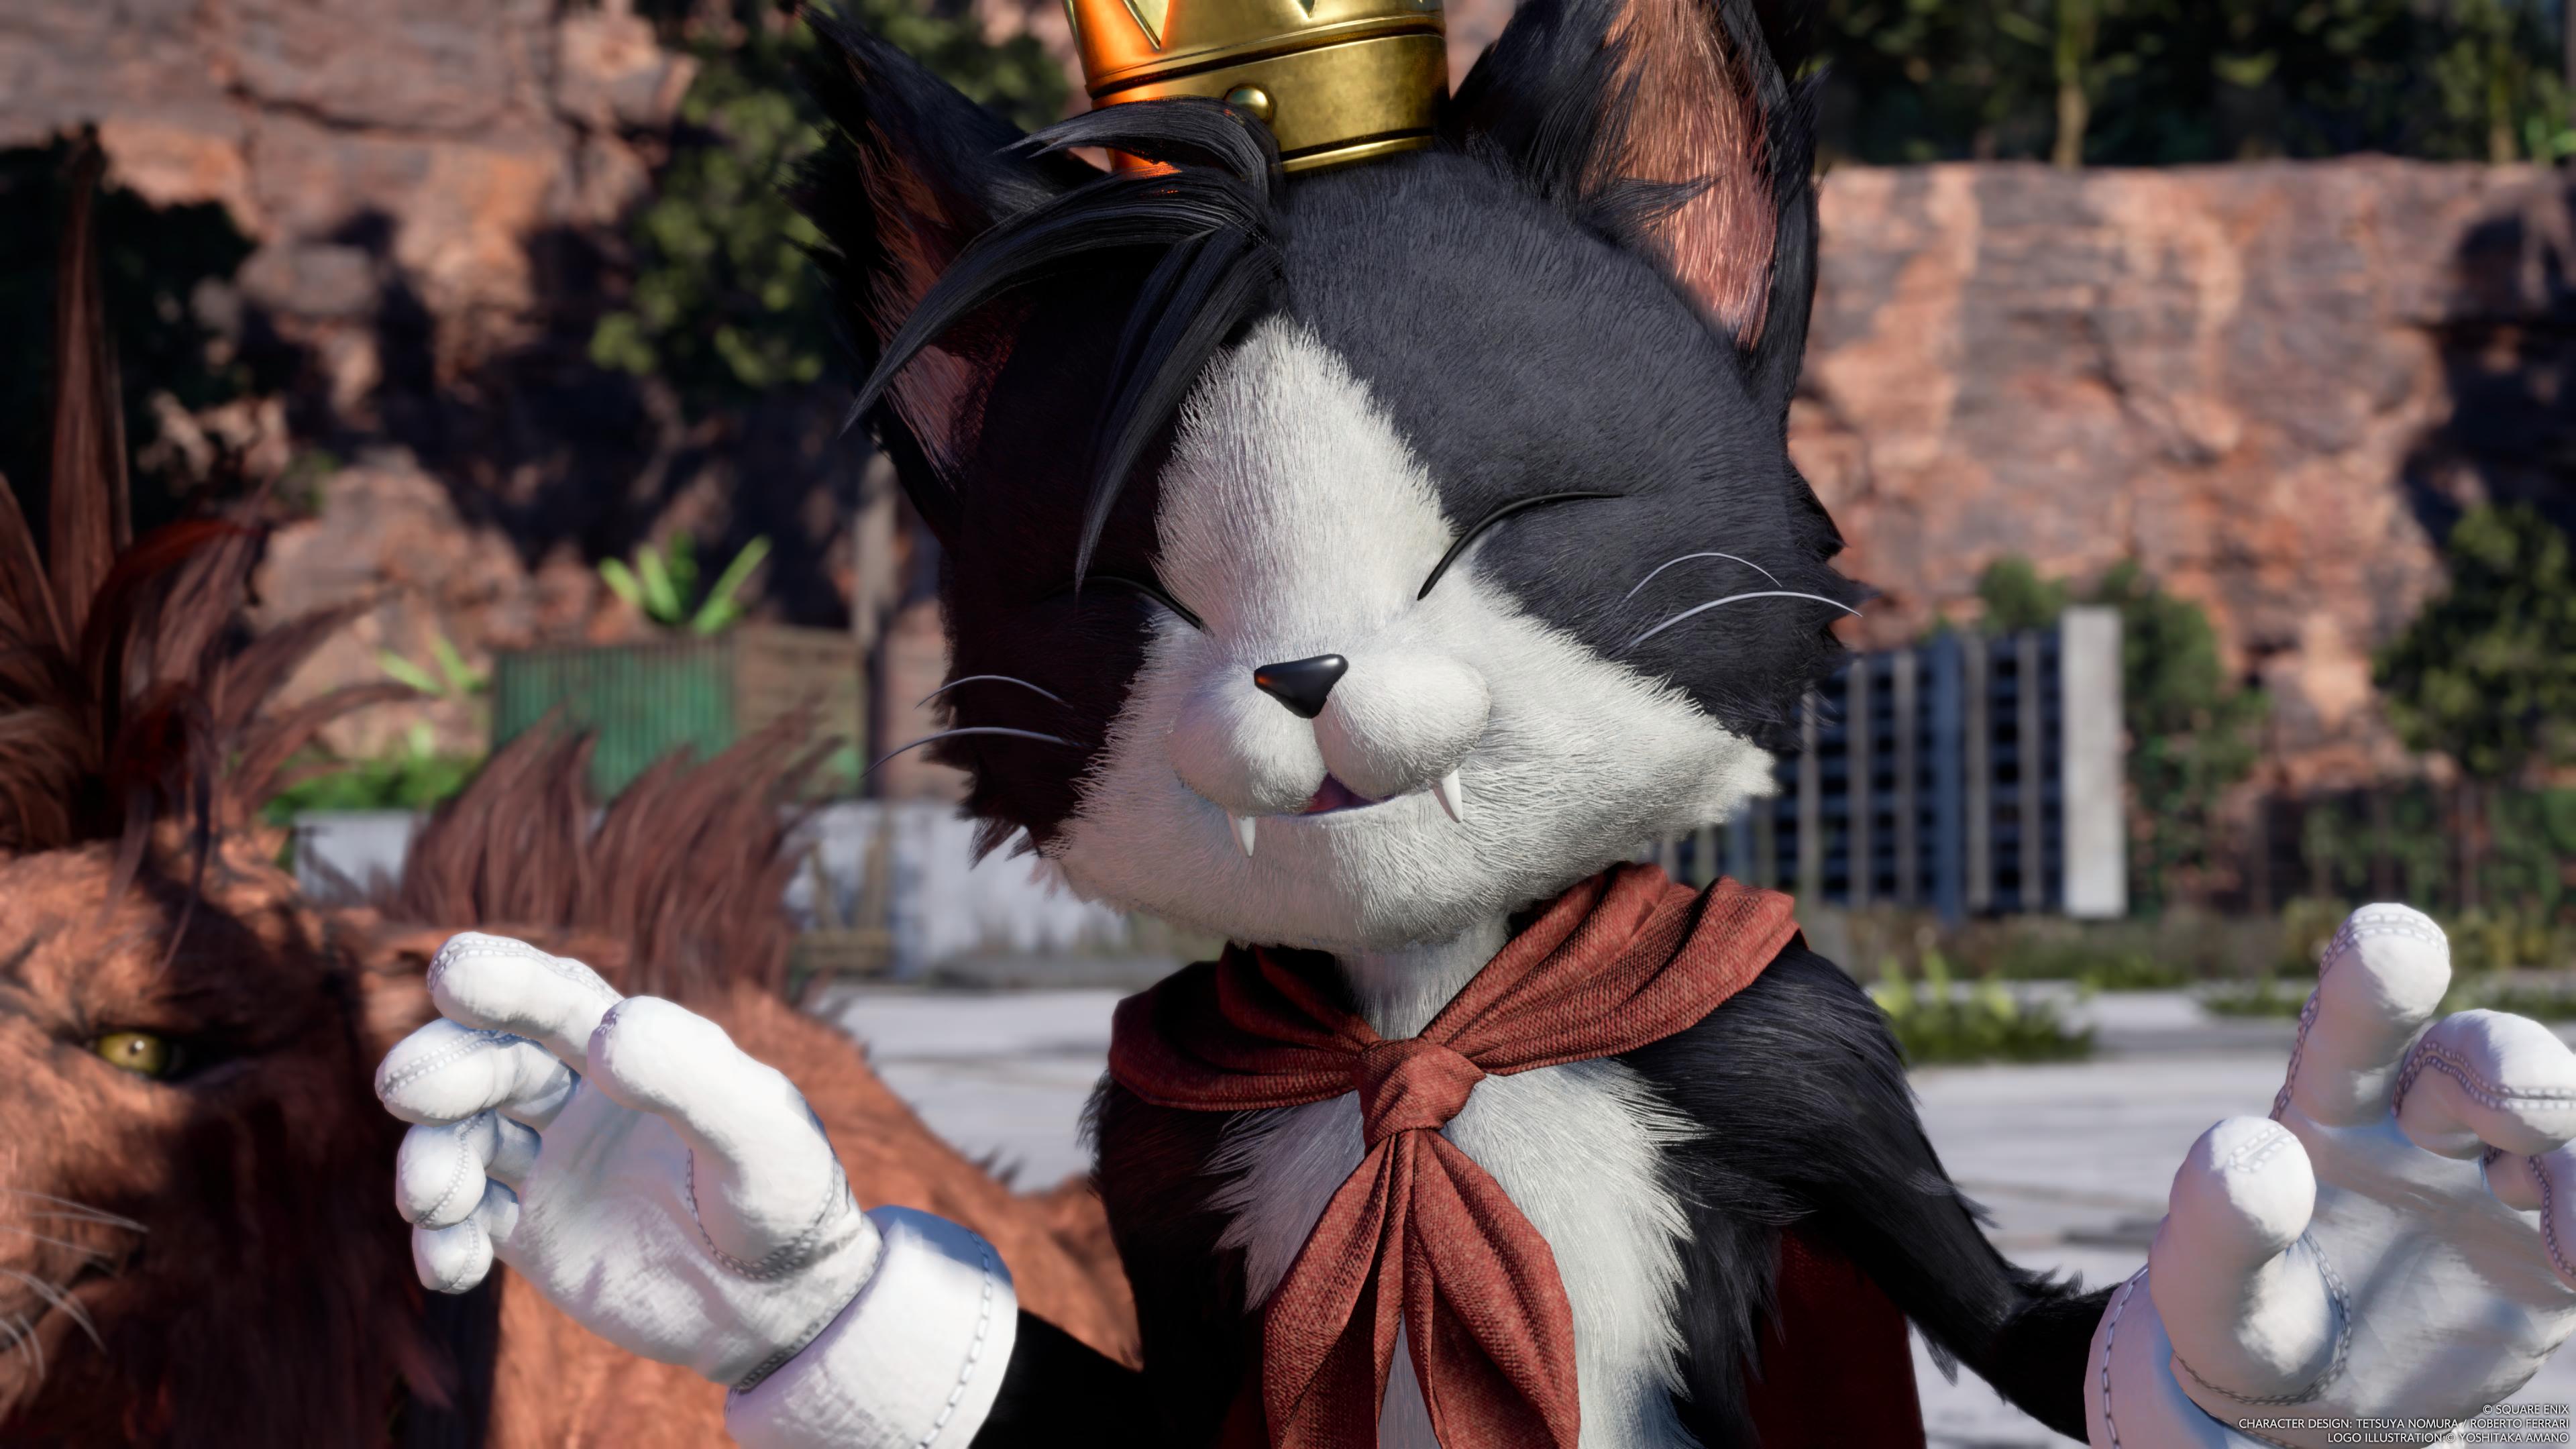 Final Fantasy Vii Rebirth Cait Sith Final Fantasy Square Enix Video Games Video Game Characters 3840x2160